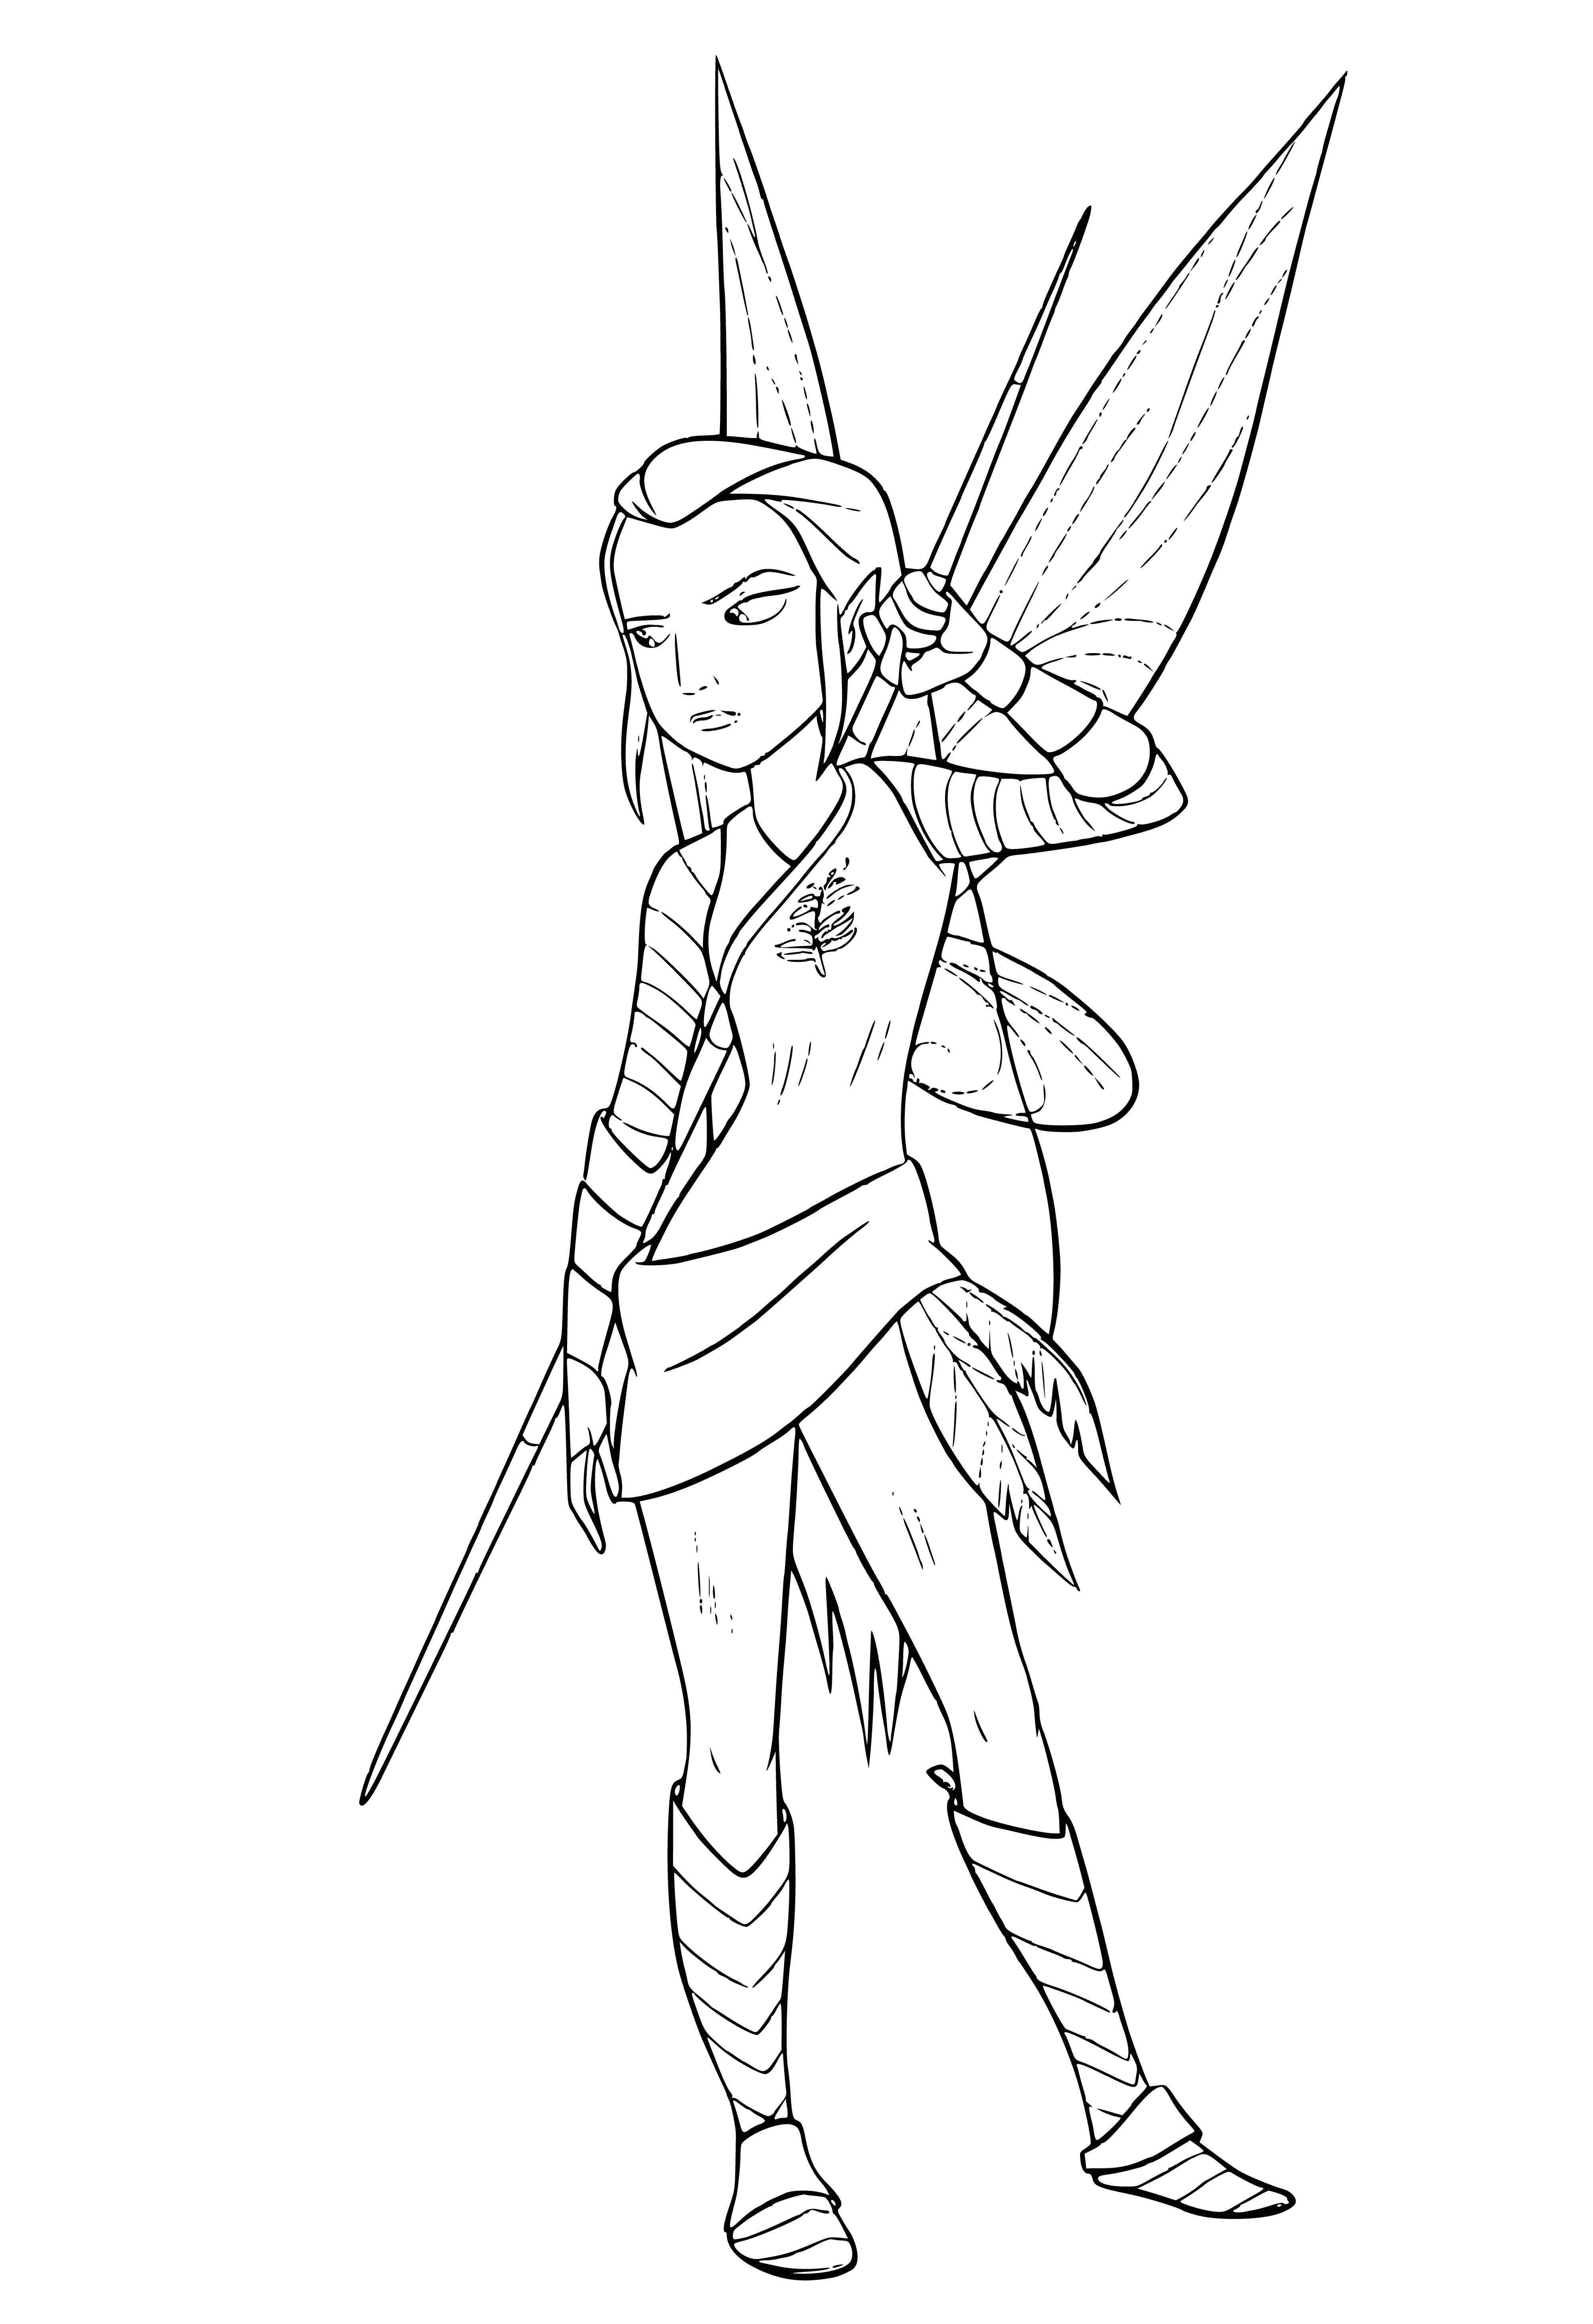 Fairy Knicks coloring page